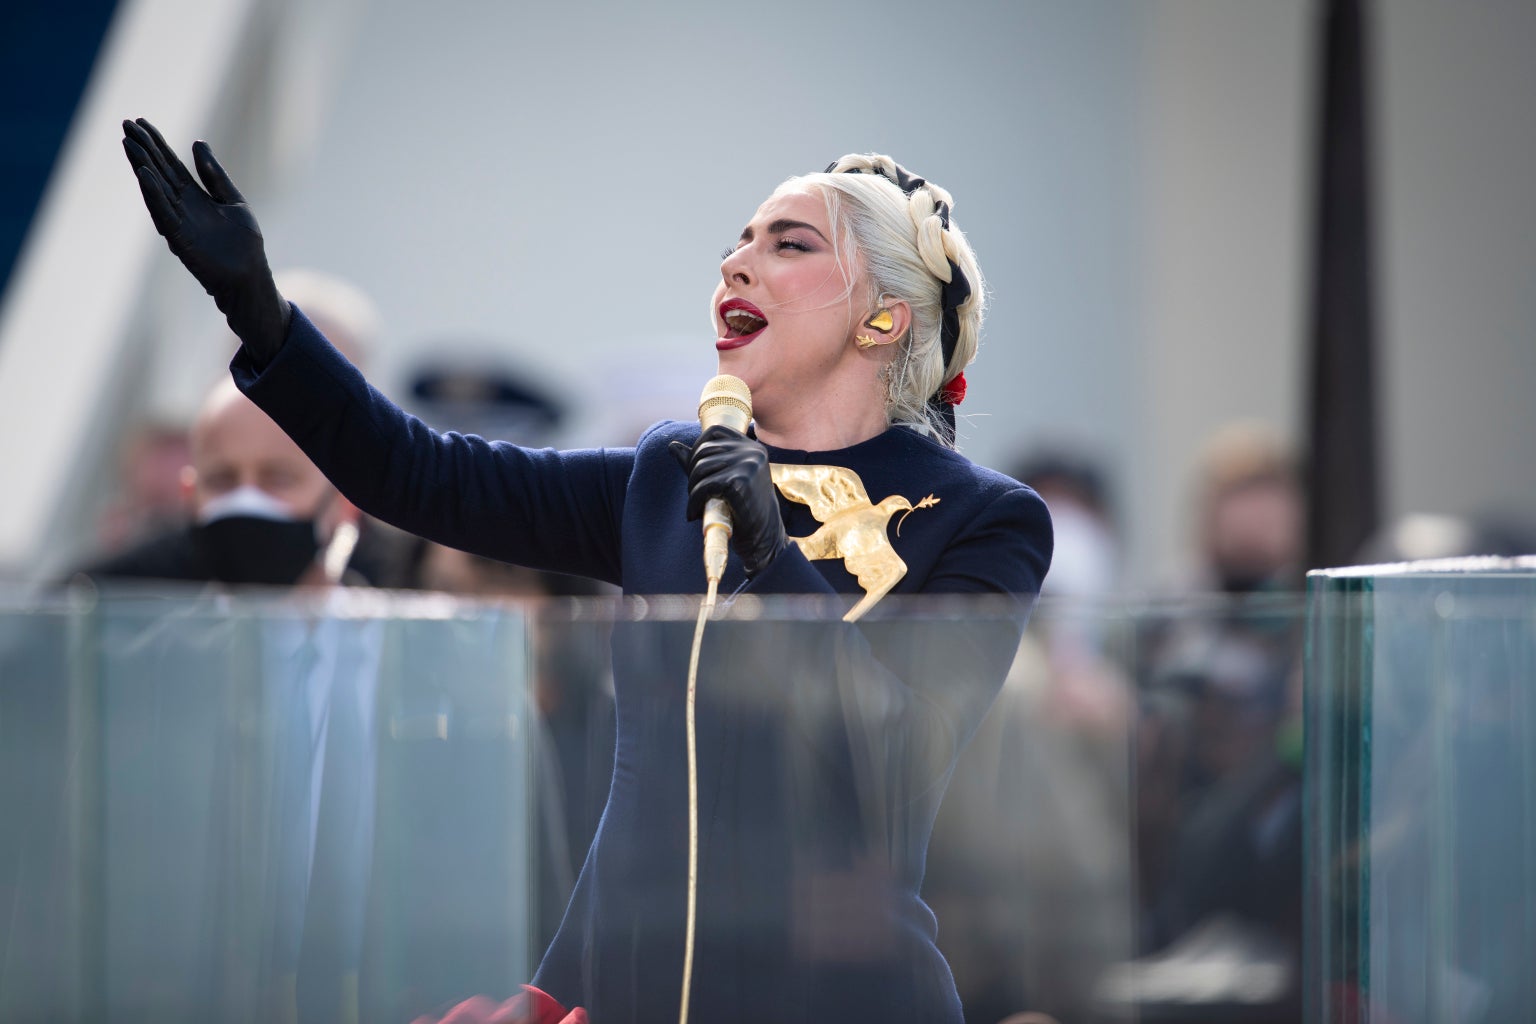 Lady Gaga sings “The Star-Spangled Banner” at the Presidential Inauguration ceremony